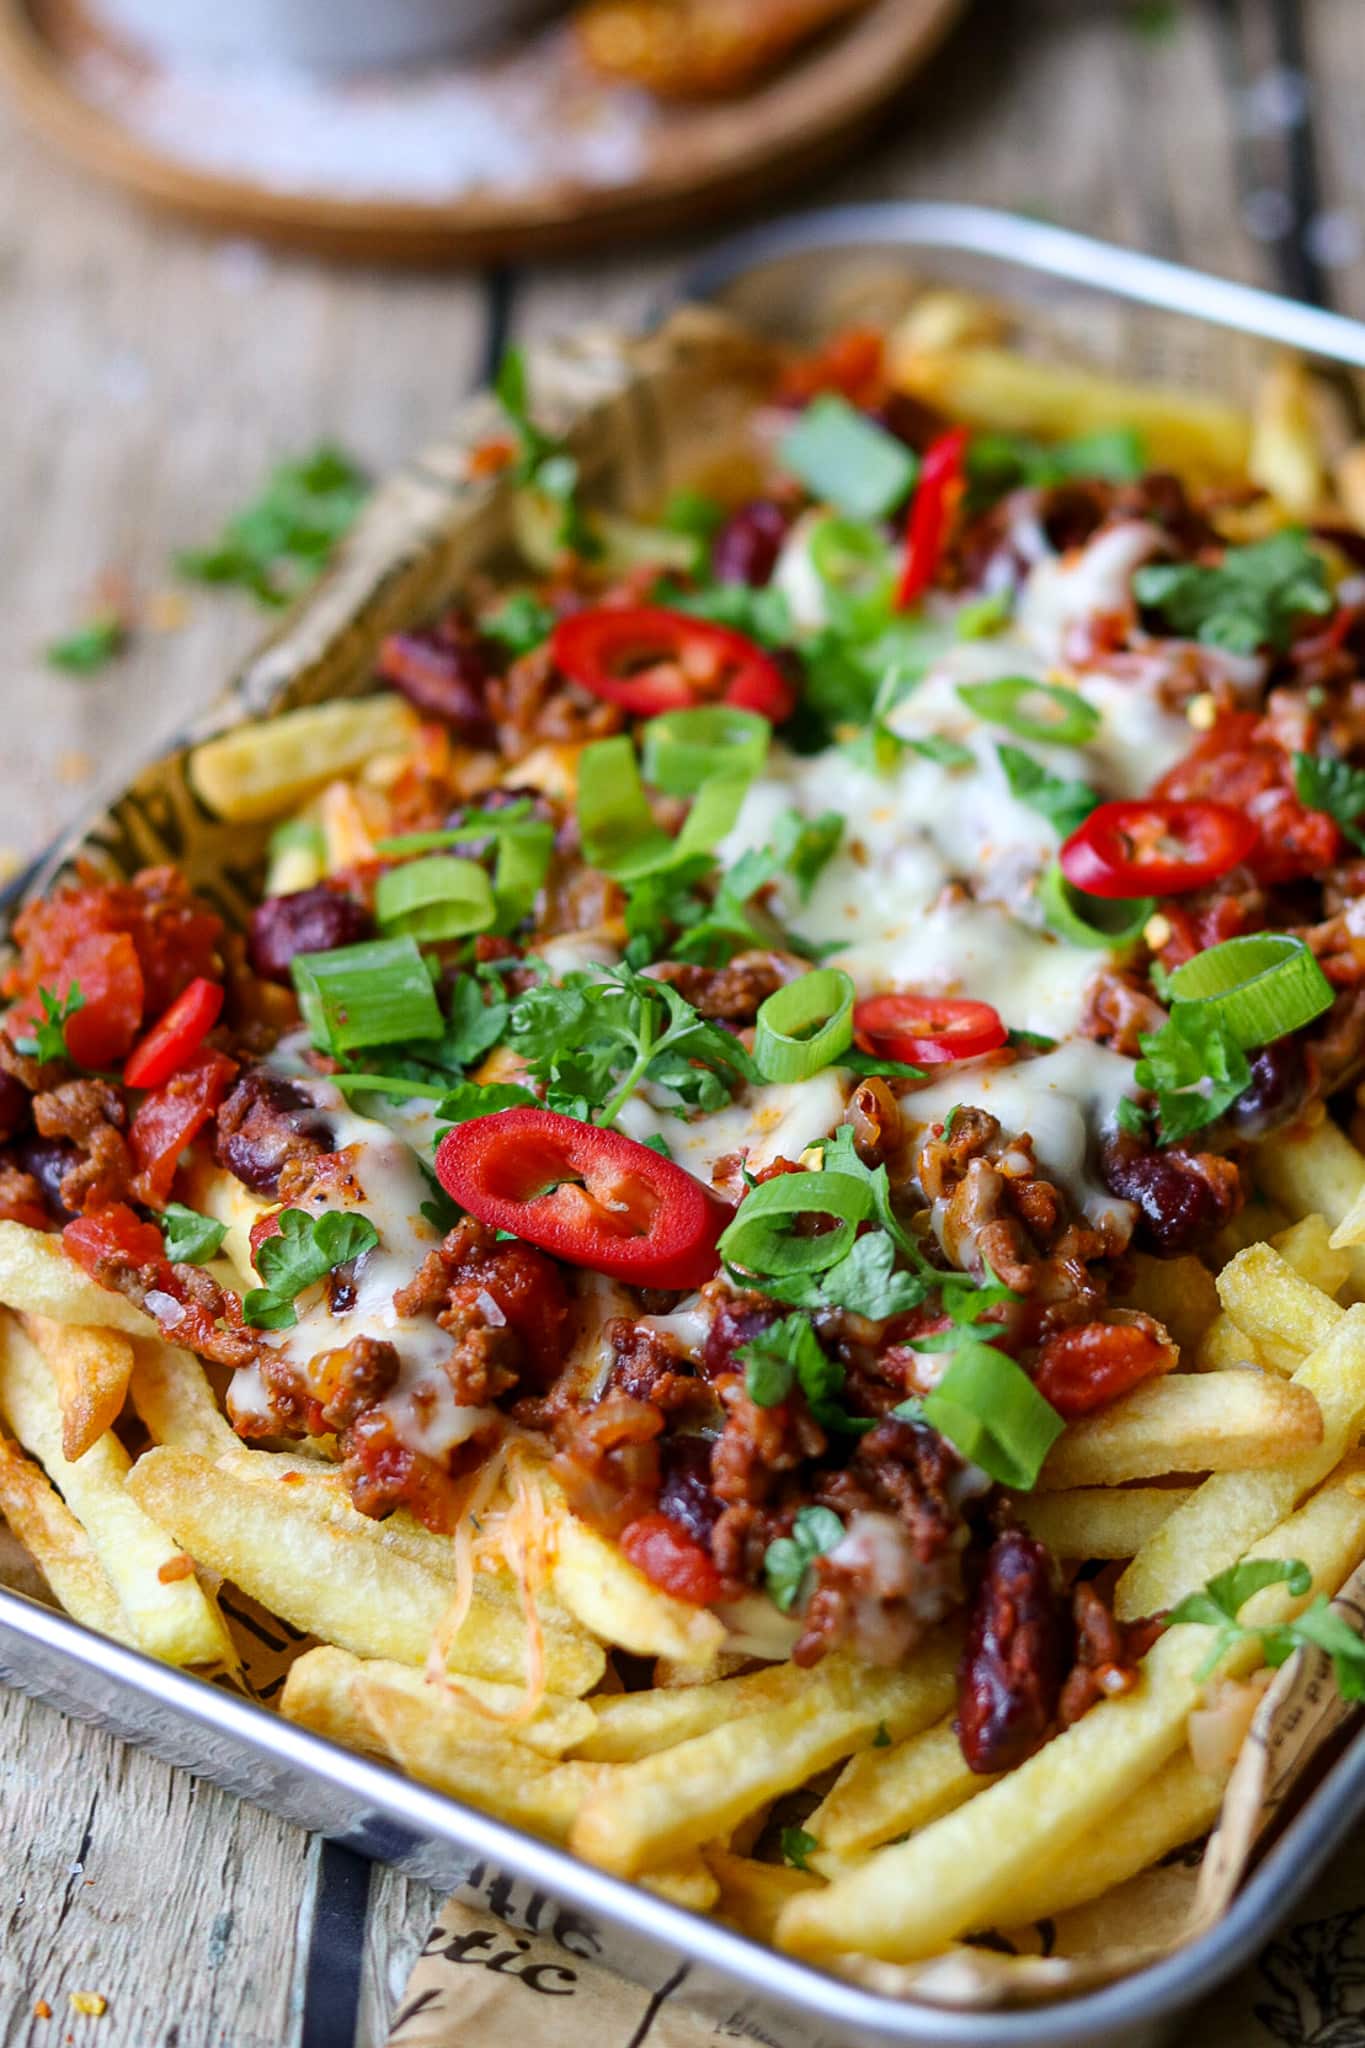 Chili Cheese Fries mit Toppings